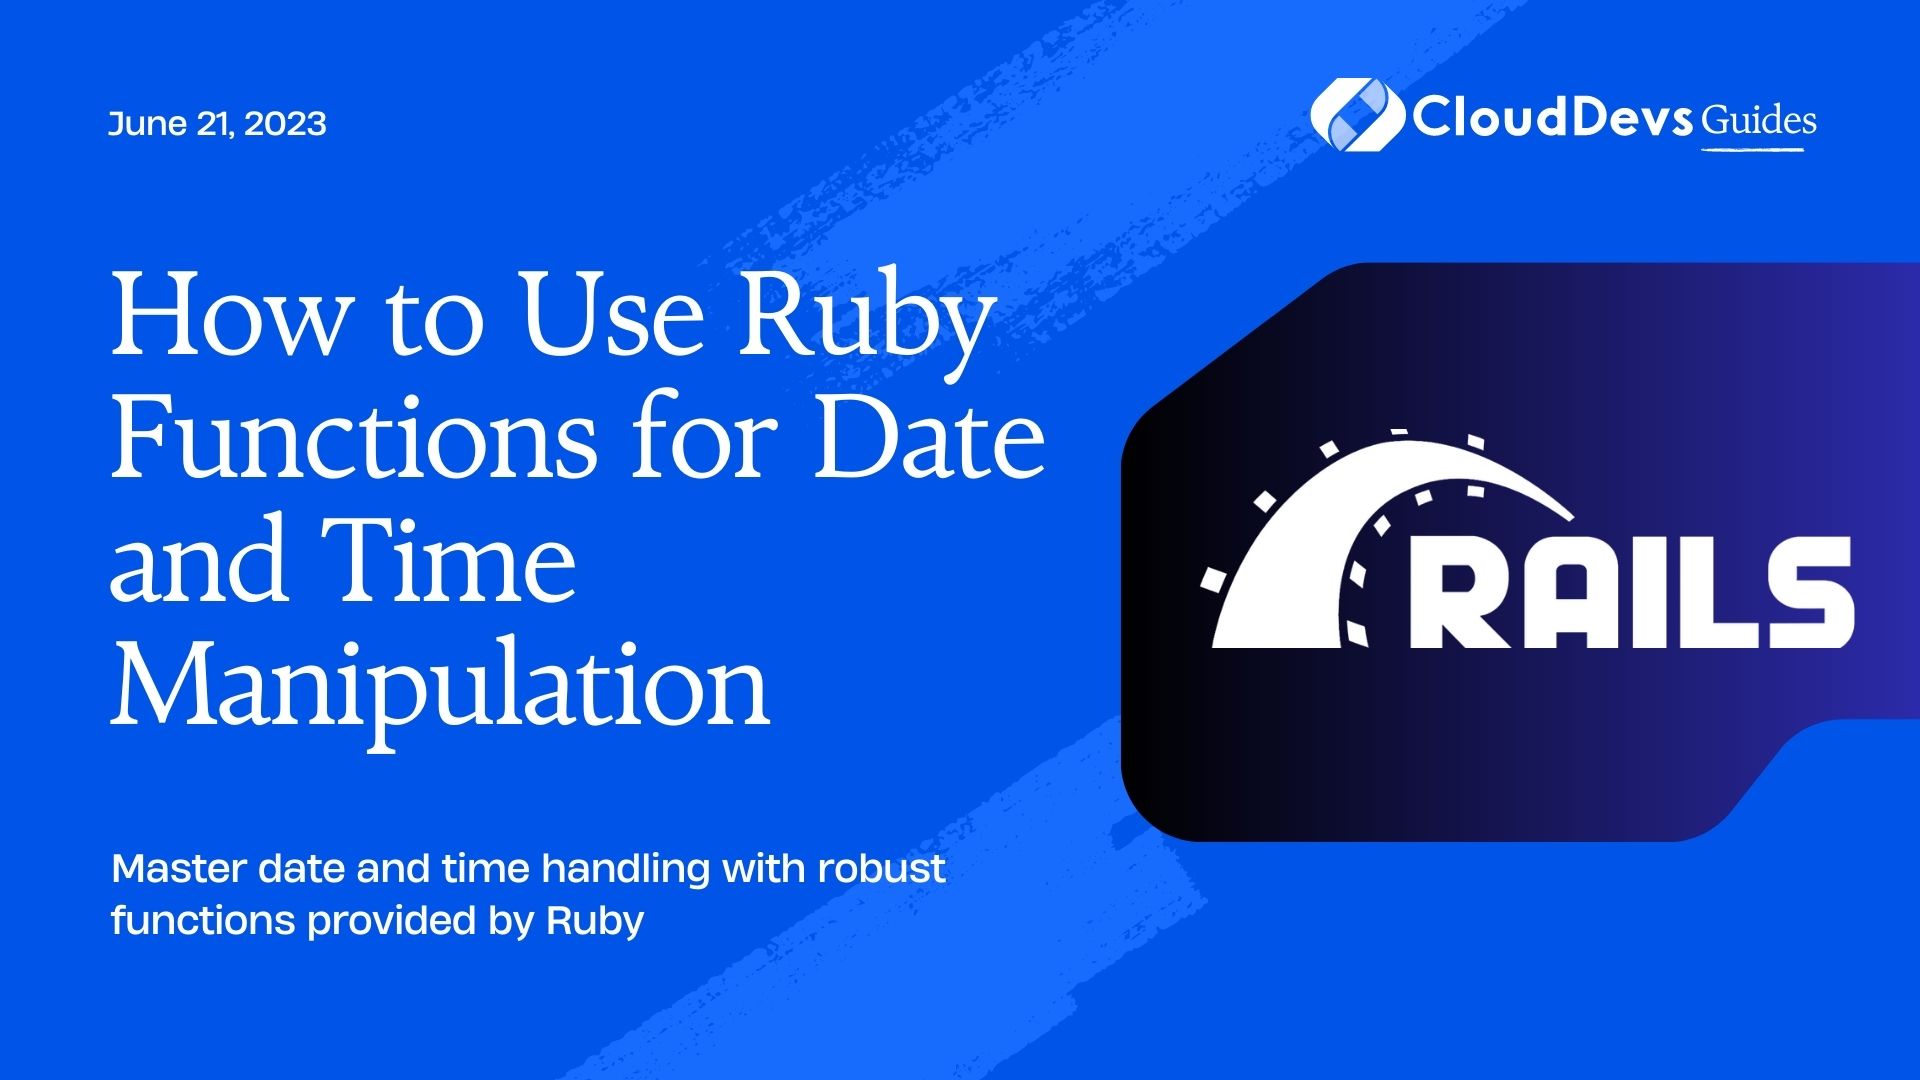 How to Use Ruby Functions for Date and Time Manipulation